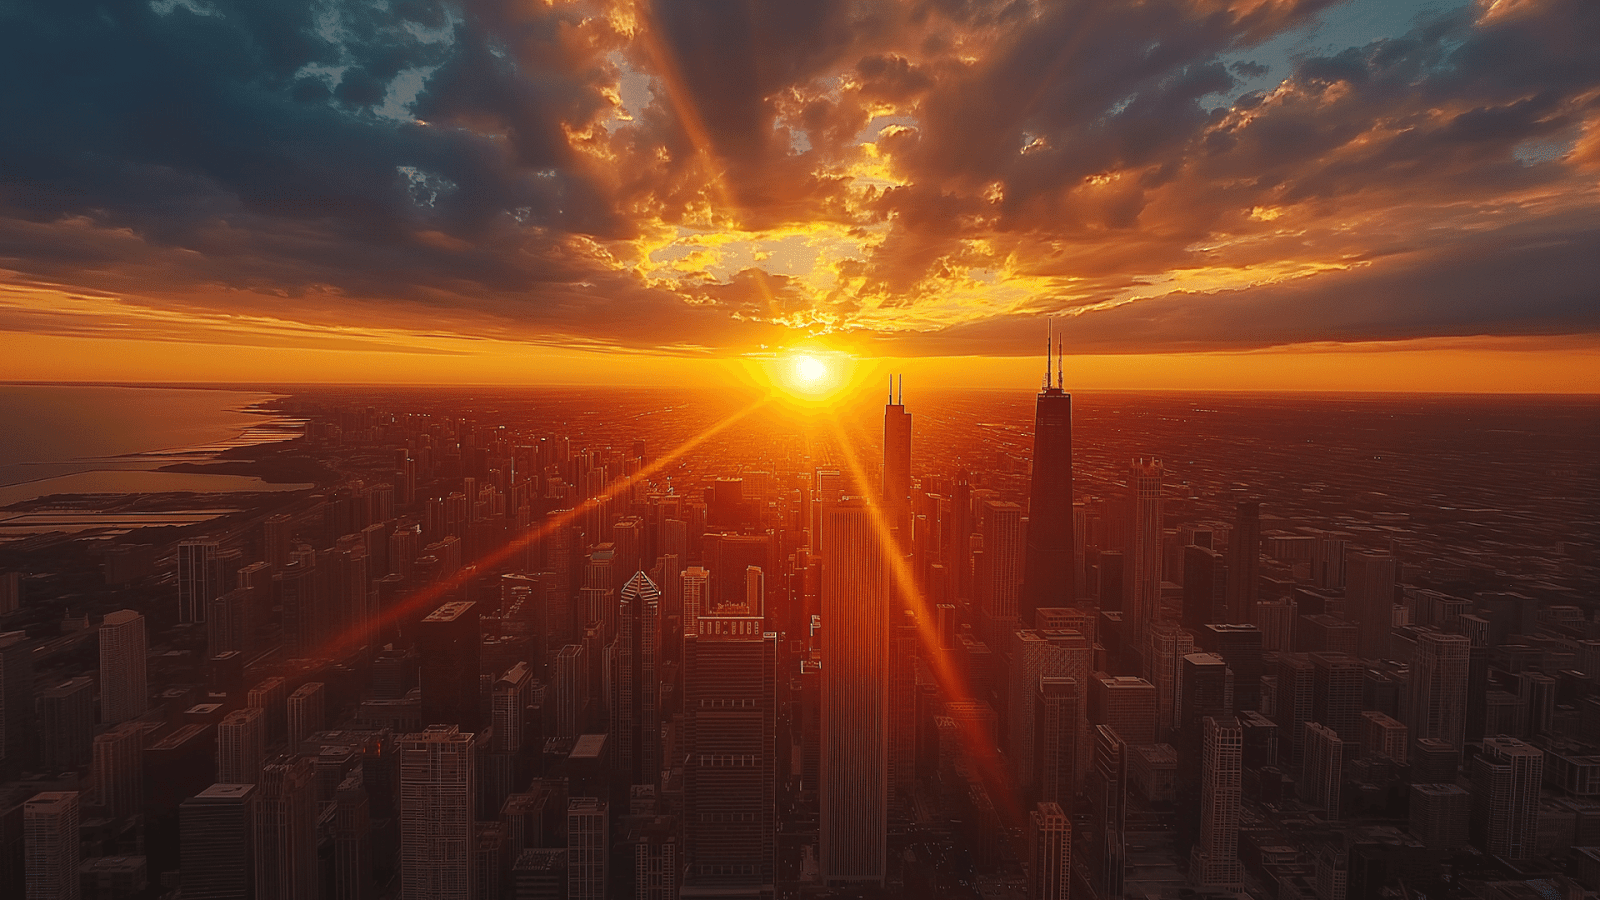 Dramatic sunset over the Chicago skyline